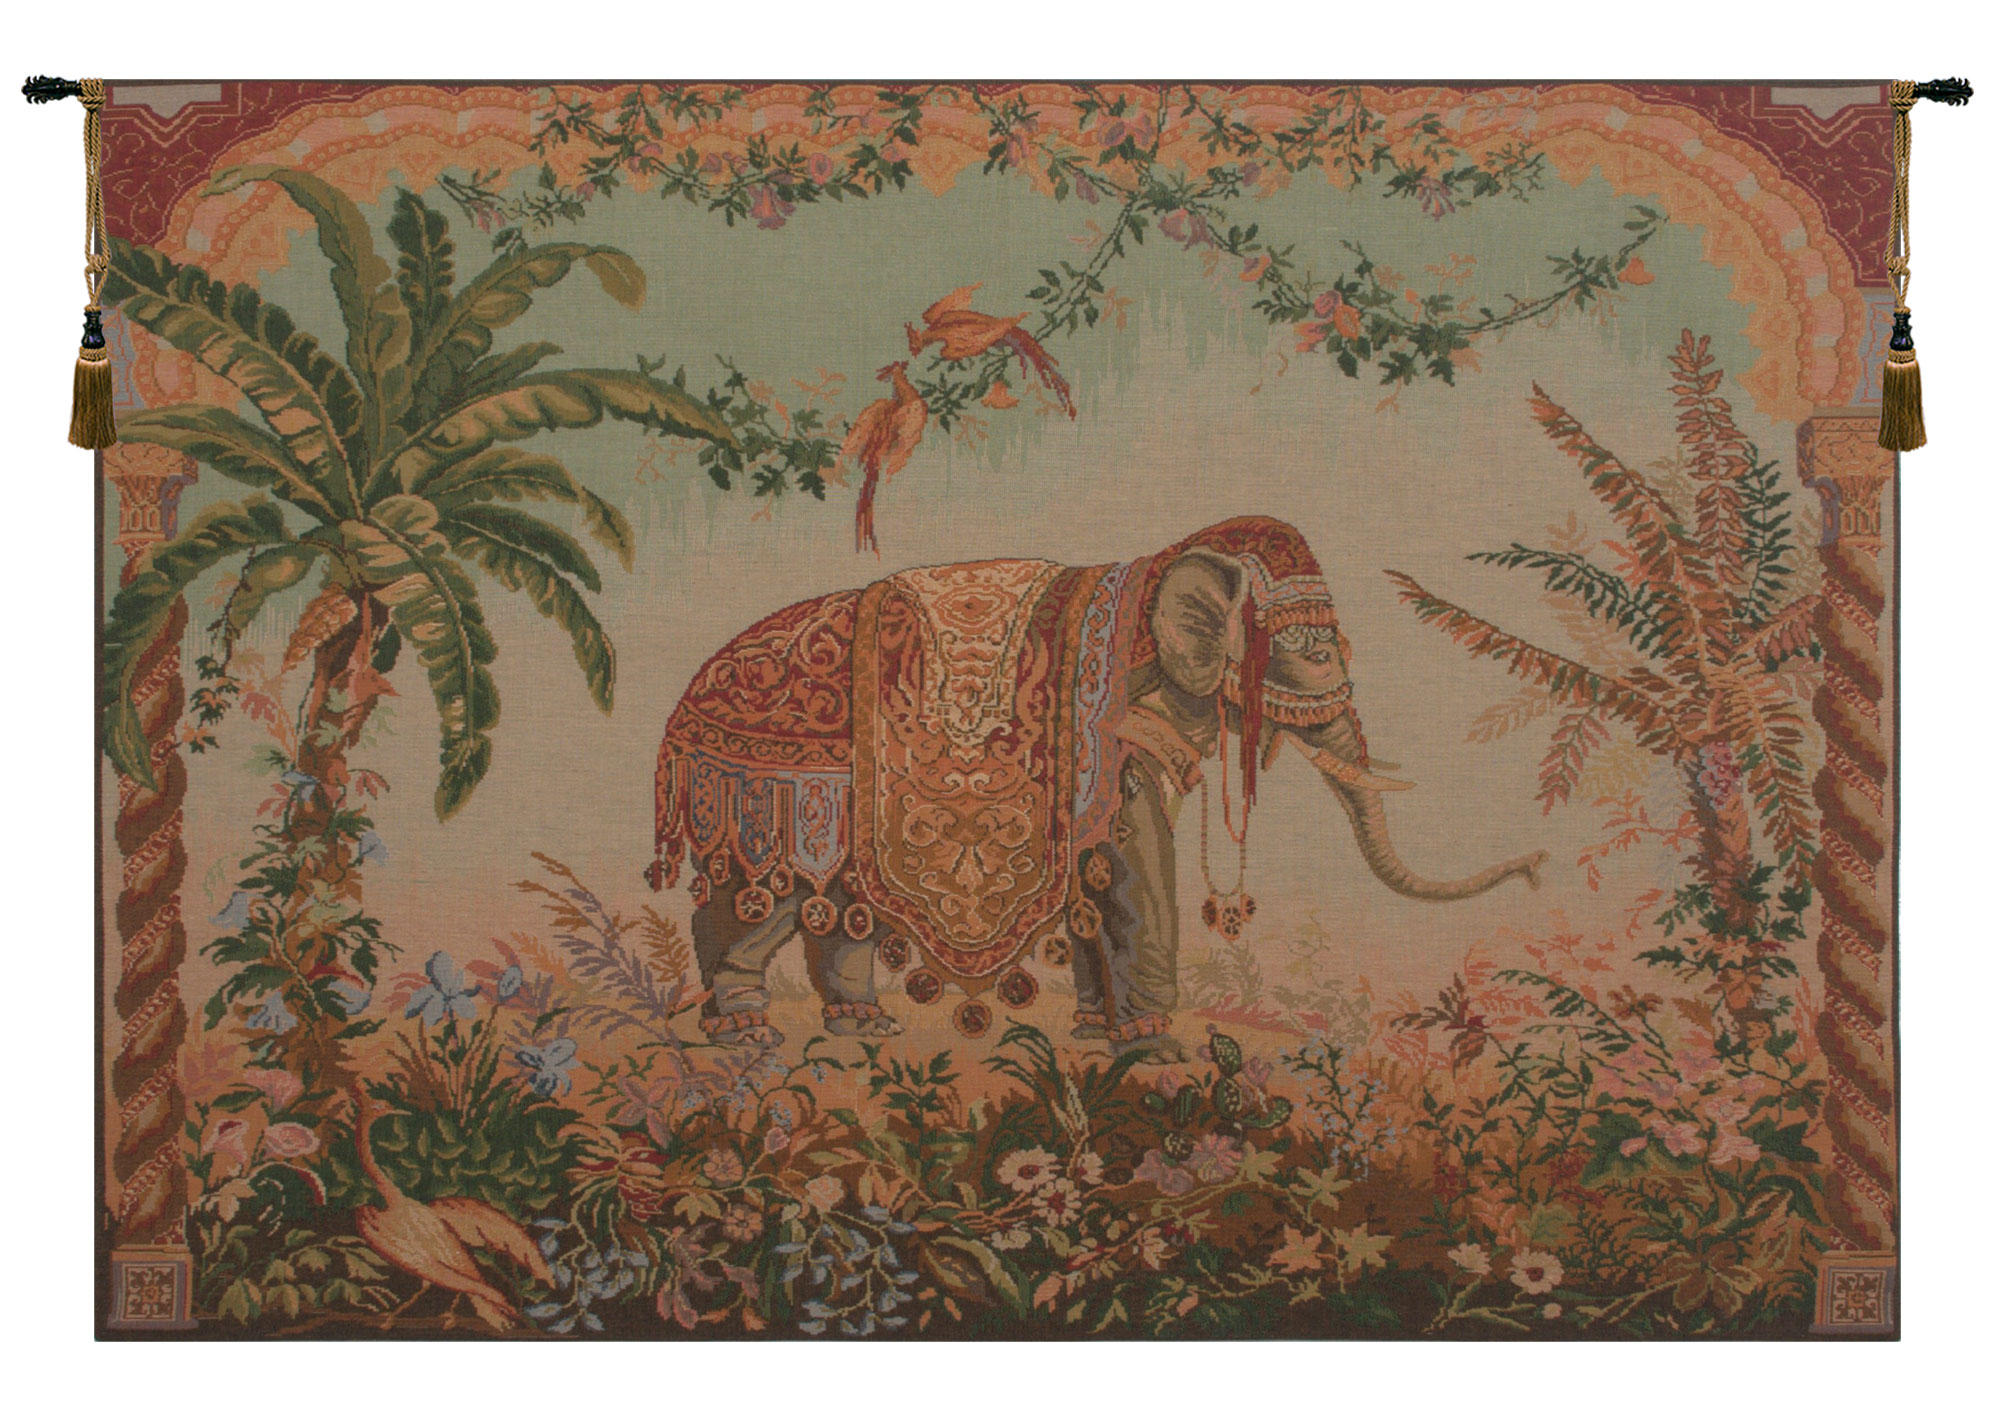 Royal Elephant Large French Tapestry Wall Art Hanging For Decor (New) 44x58 inch